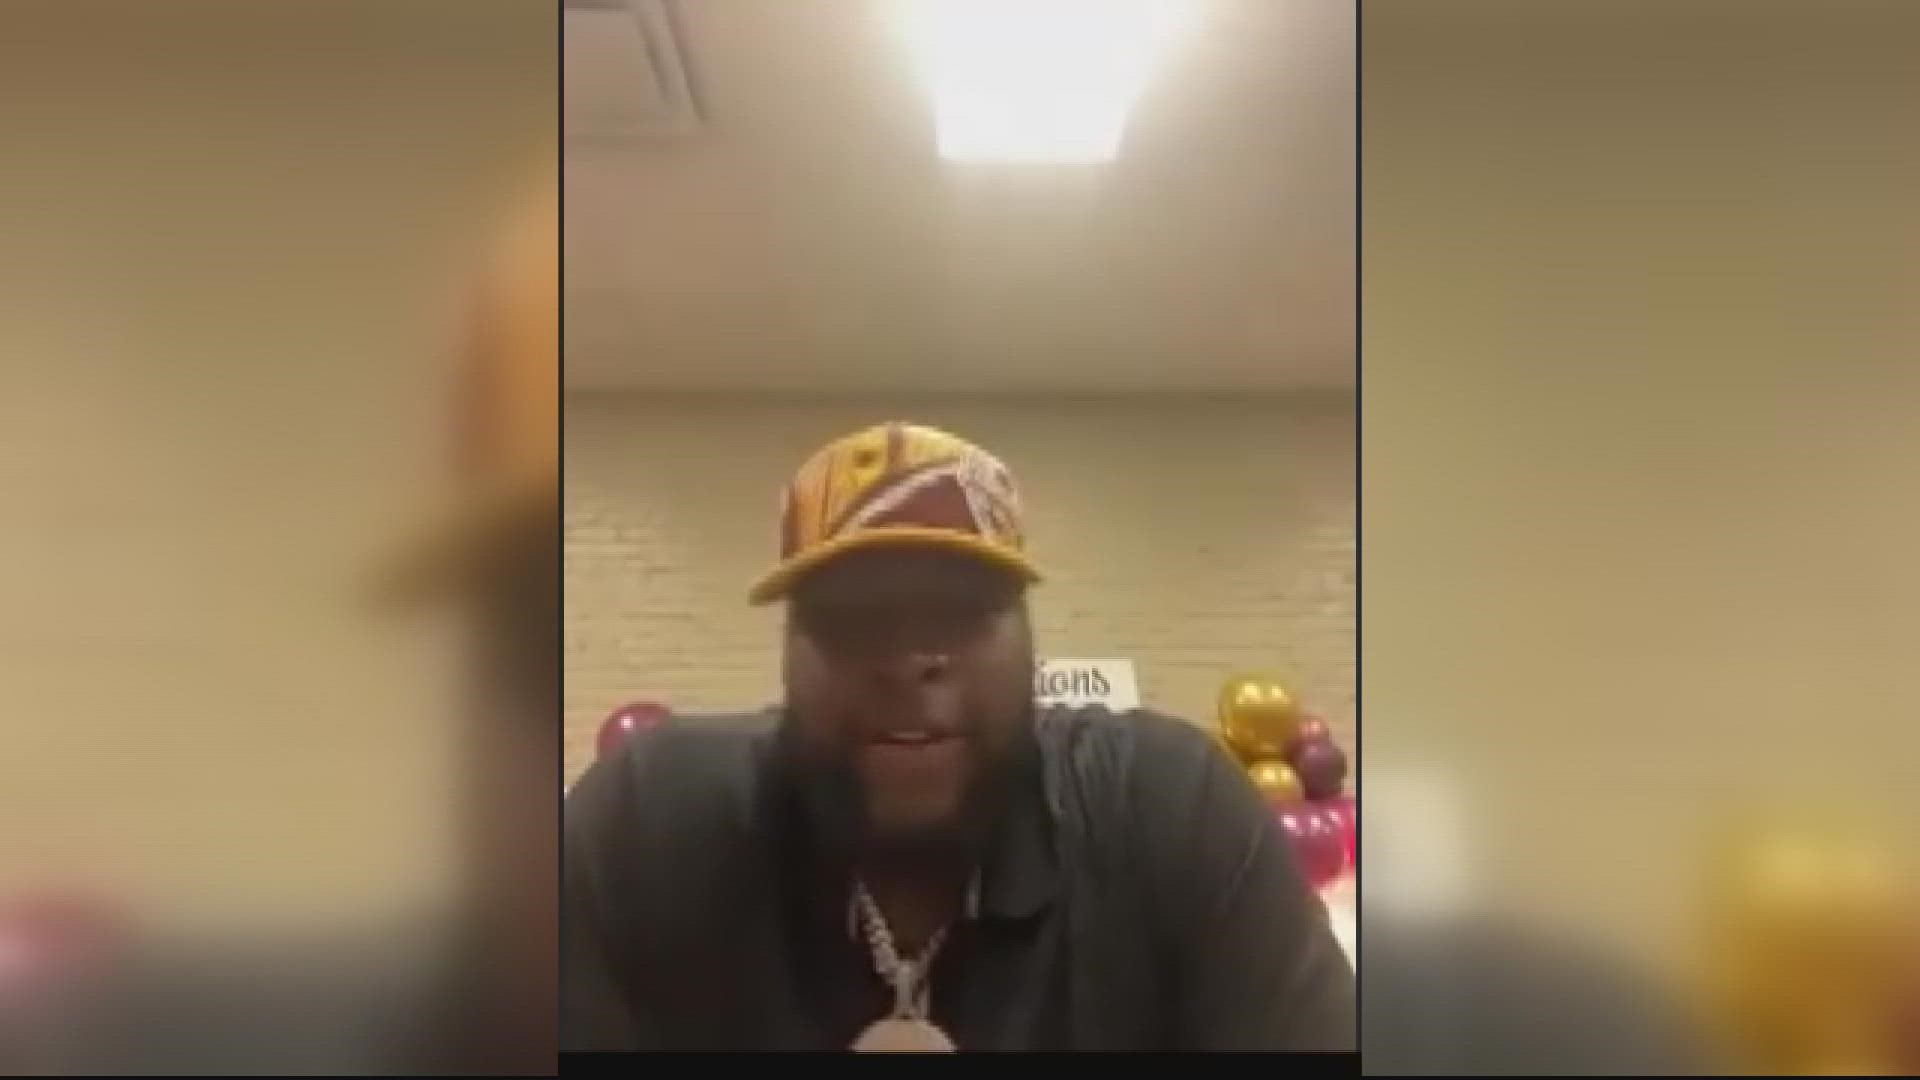 Washington has another defensive tackle from Alabama after selecting Phidarian Mathis in the second round of the NFL draft.